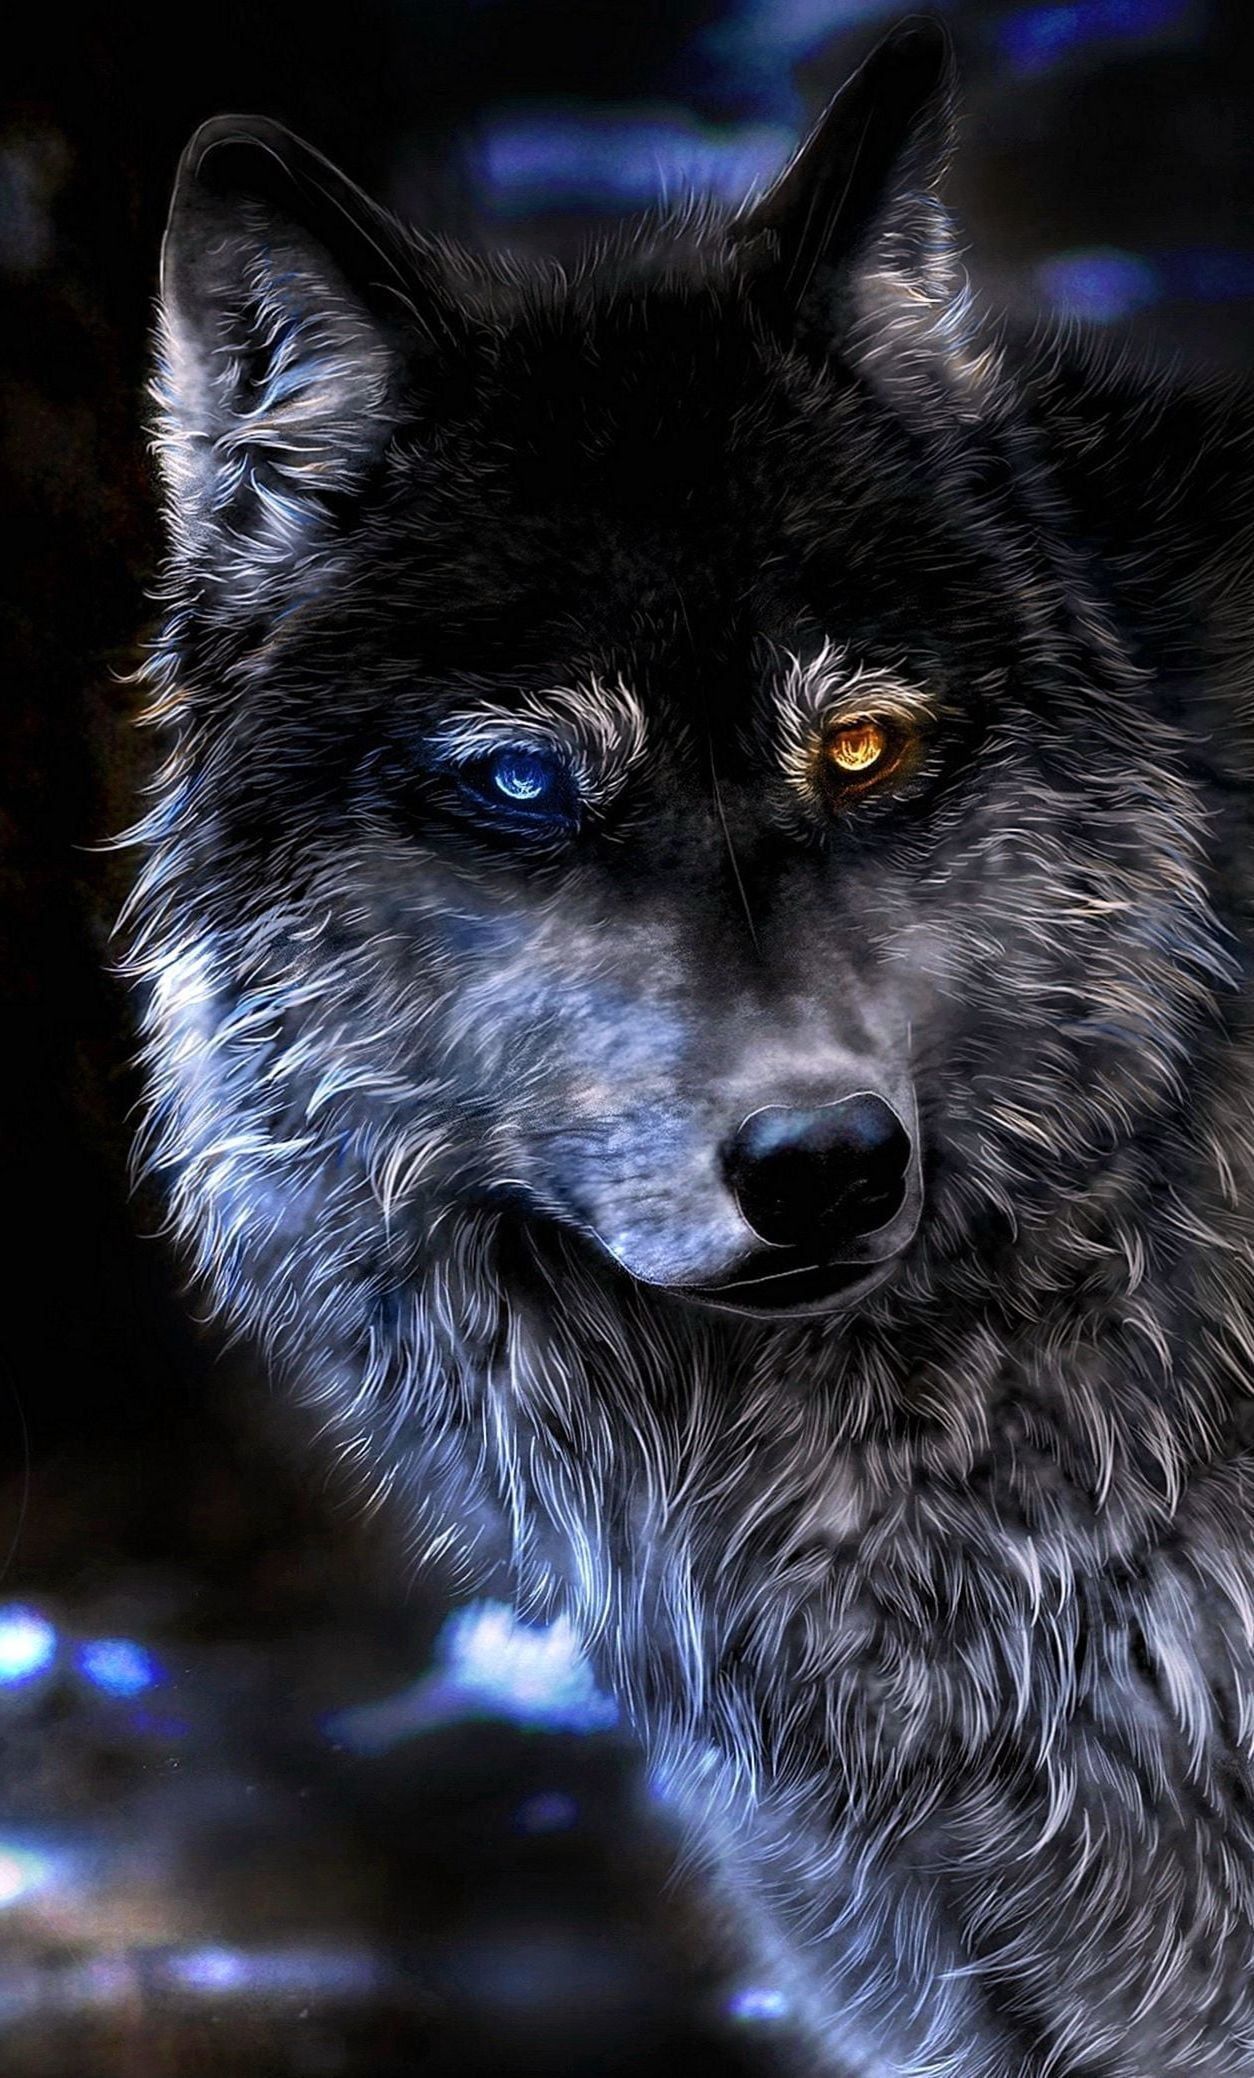 Angry wolf wallpapers k iphone angry wolf wallpapers k iphone iphone wallpaper wolf angry wolf wolf wallpaper